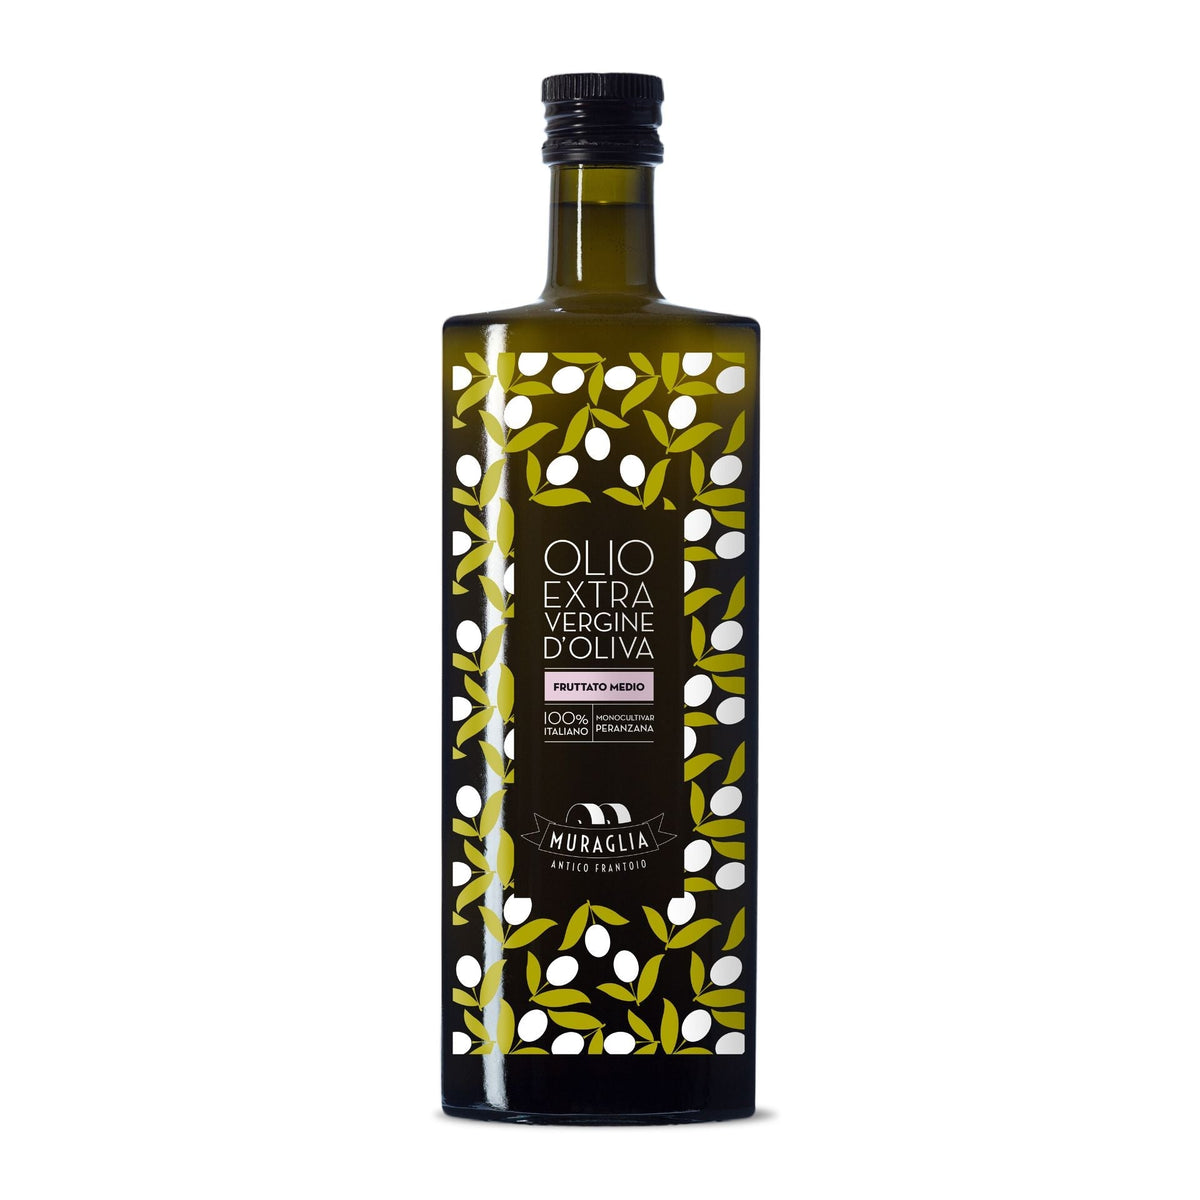 Frantoio Muraglia Medium Fruity Peranzana Extra Virgin Olive Oil 500ml  | Imported and distributed in the UK by Just Gourmet Foods